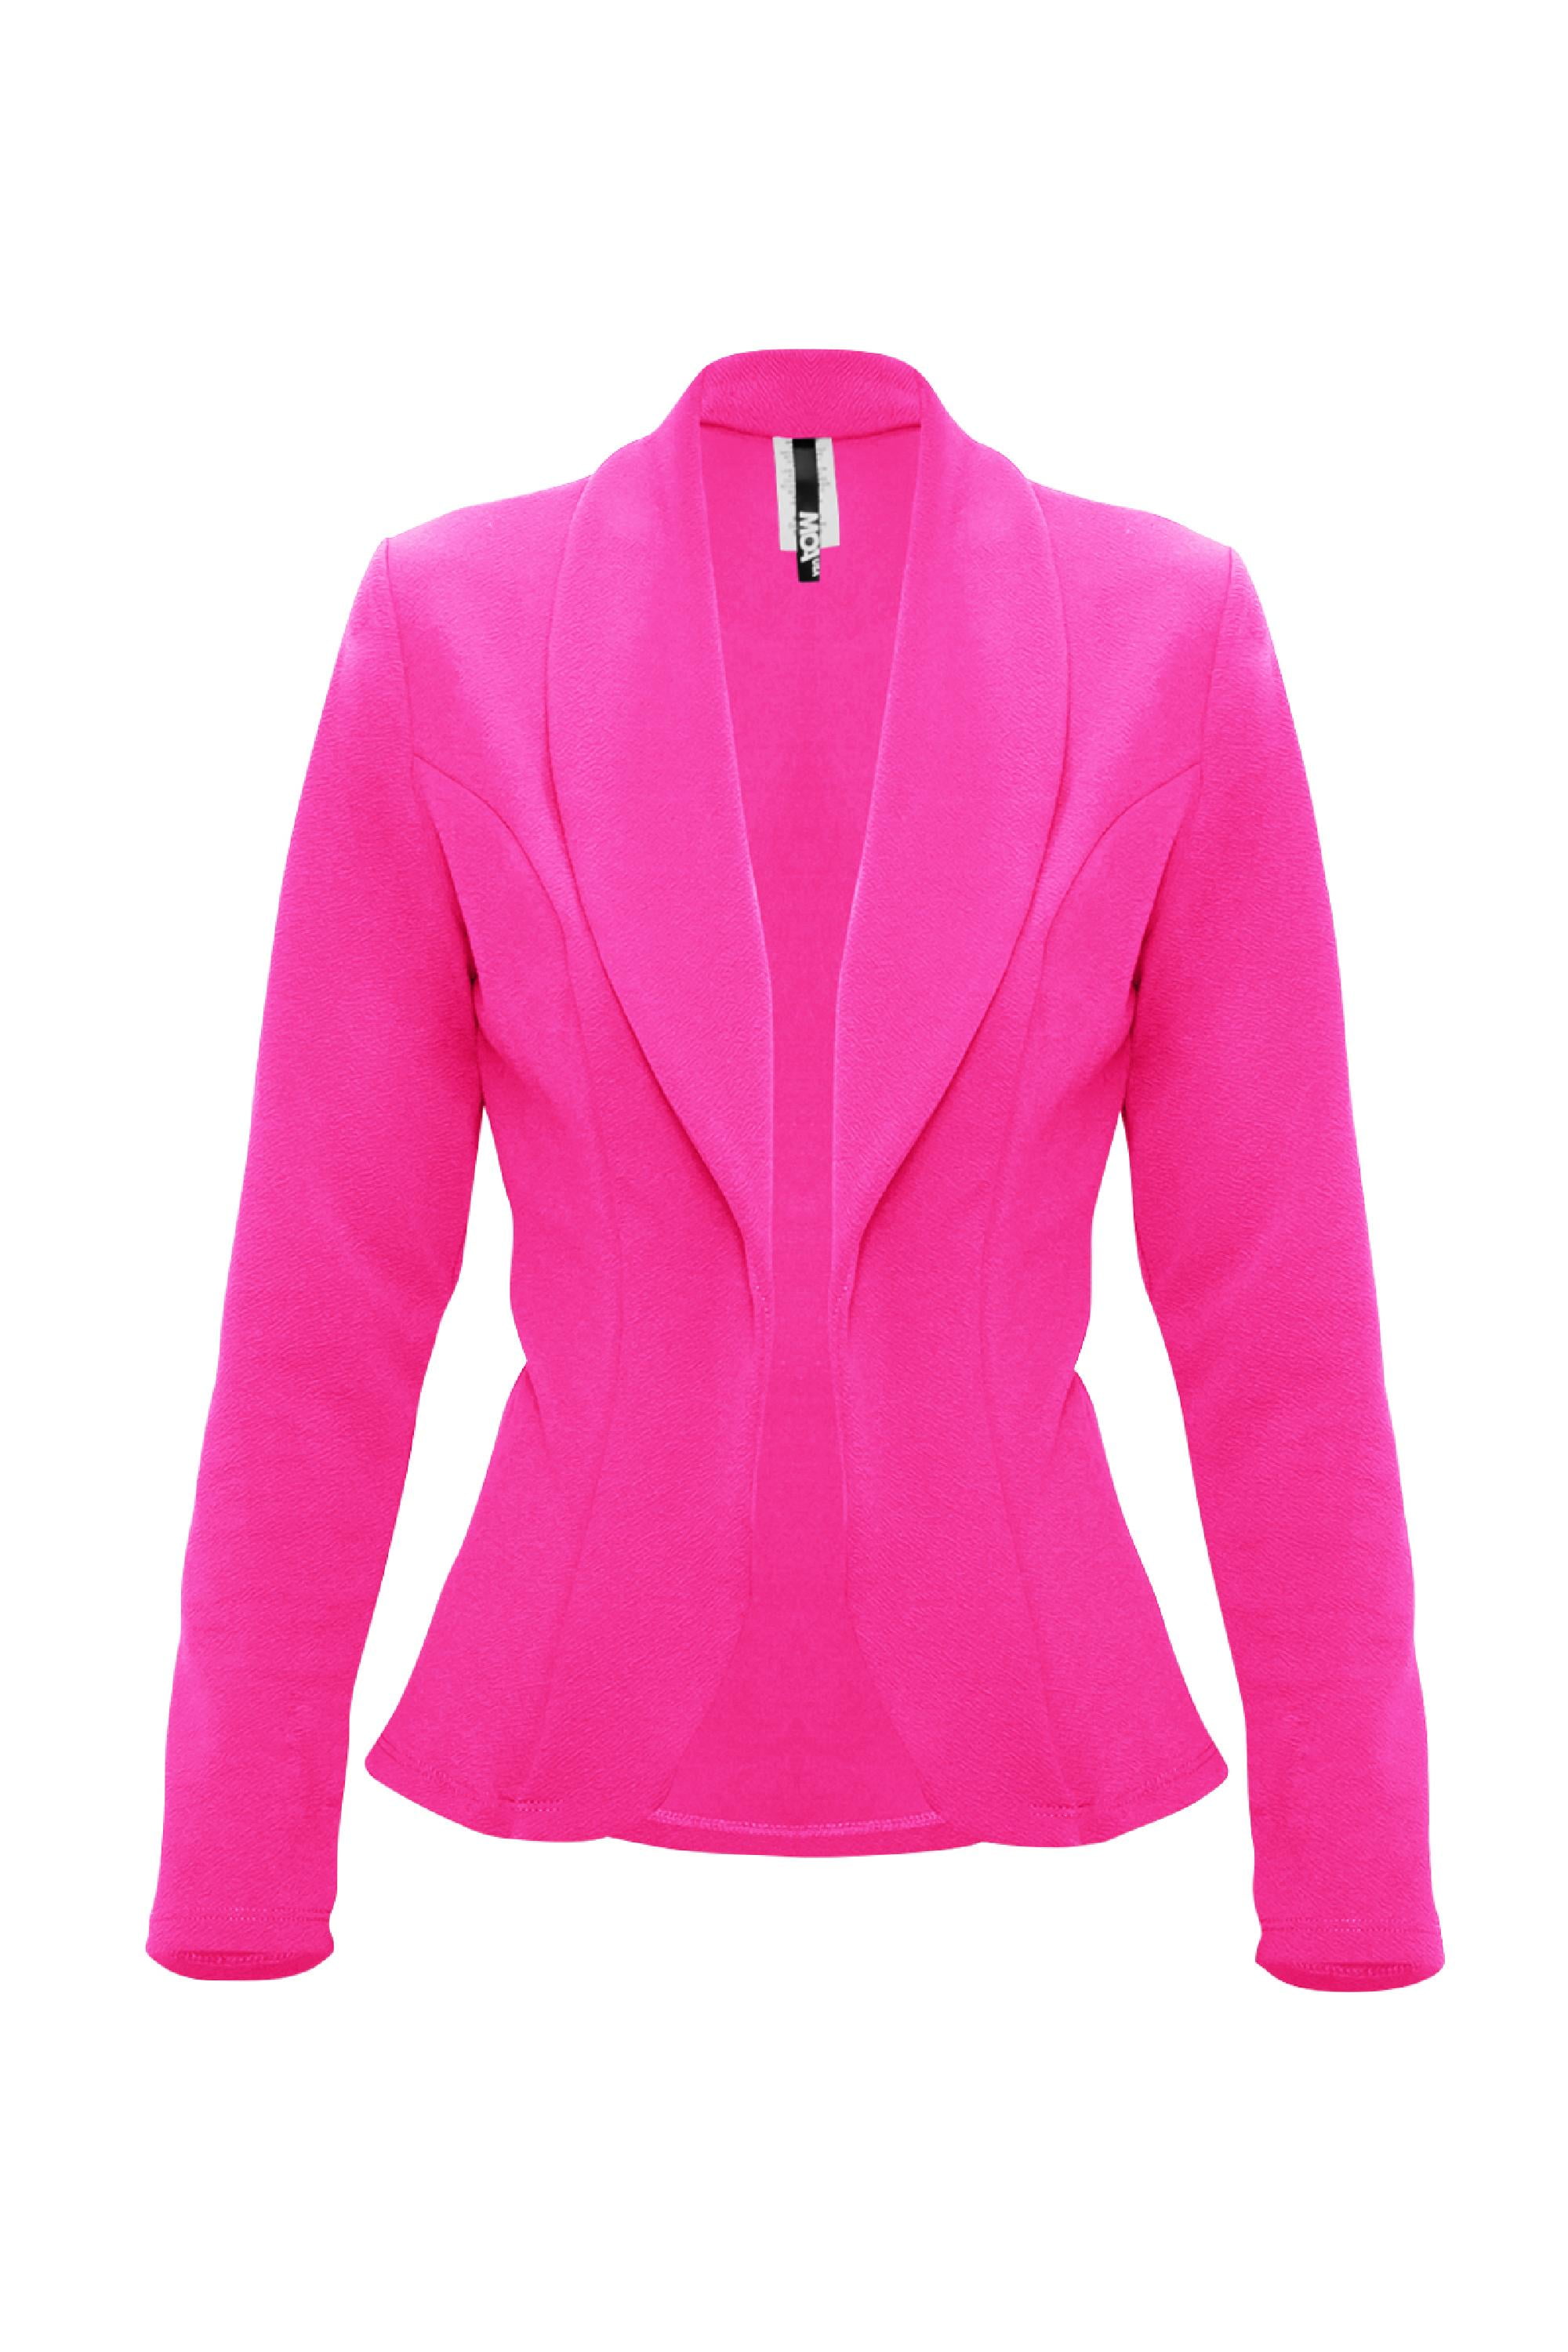 Moa Collection Women's Casual Long Sleeve Solid Open Front Blazer ...